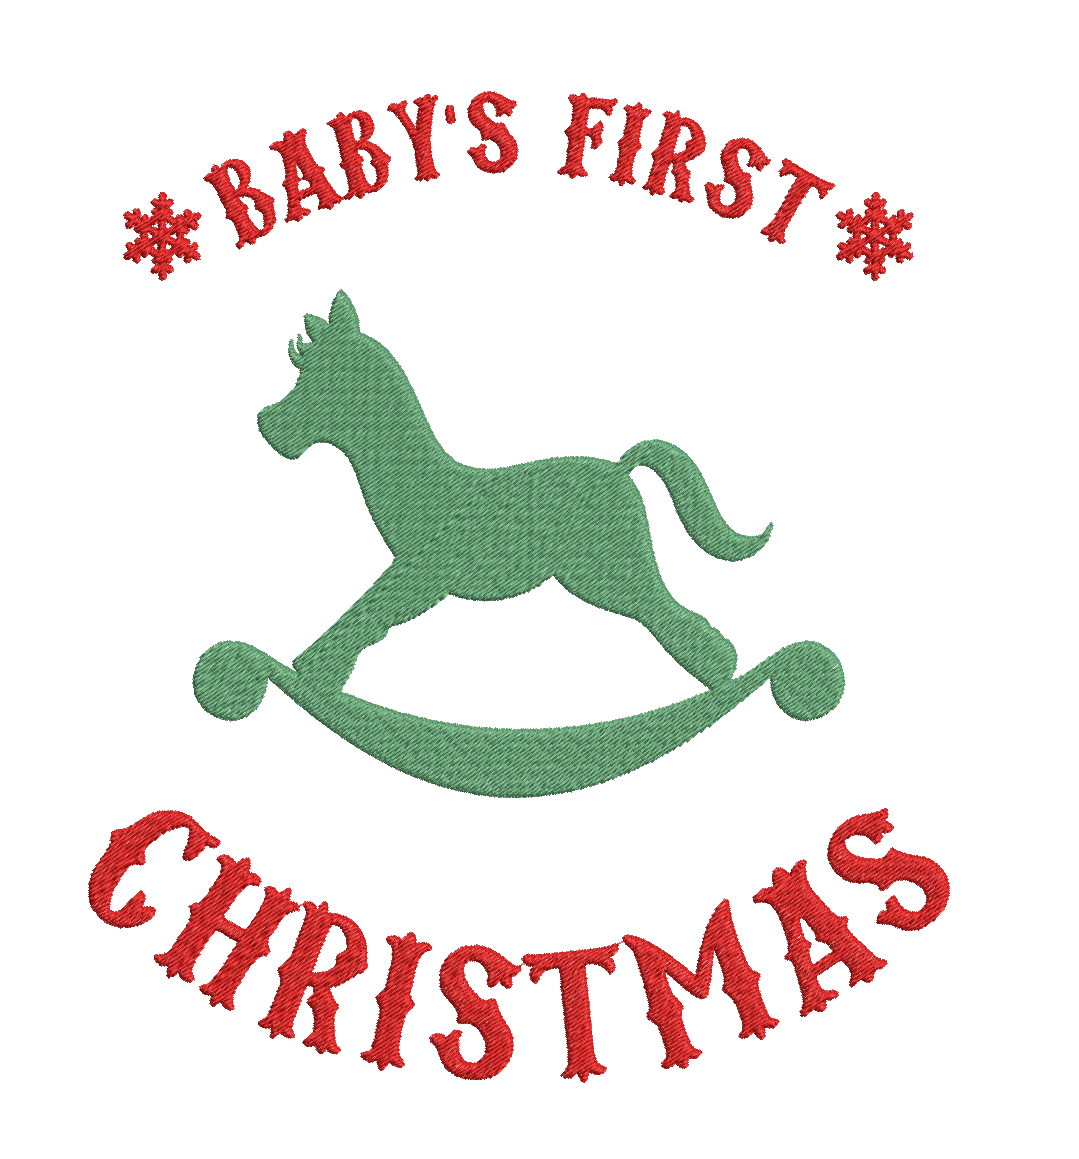 My first Christmas  - Designs pack : Embroidery Design